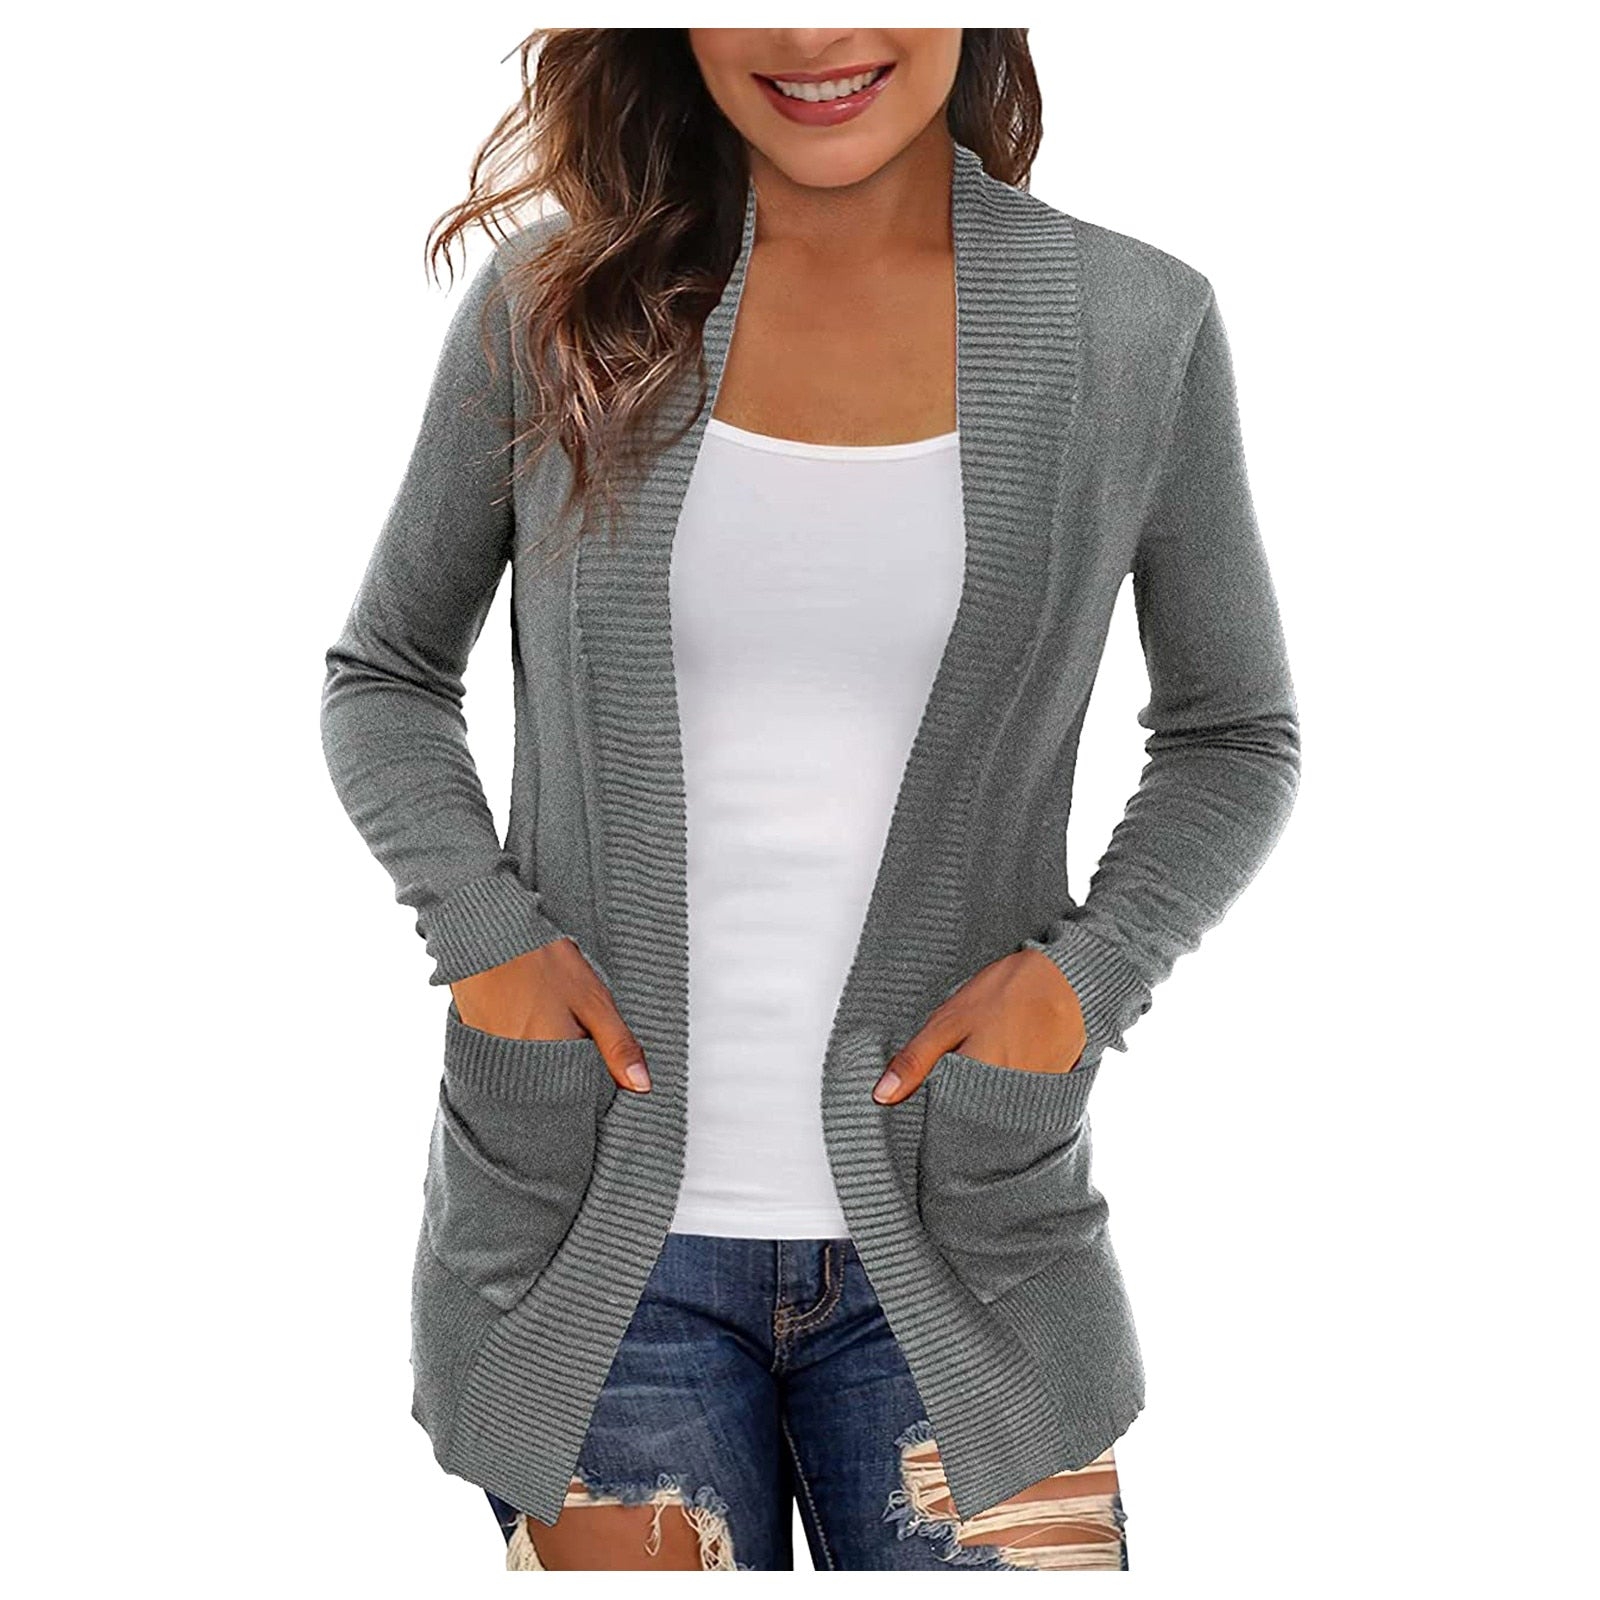 Lightweight Open Front Cardigan Sweater With Pockets - Fashion Damsel